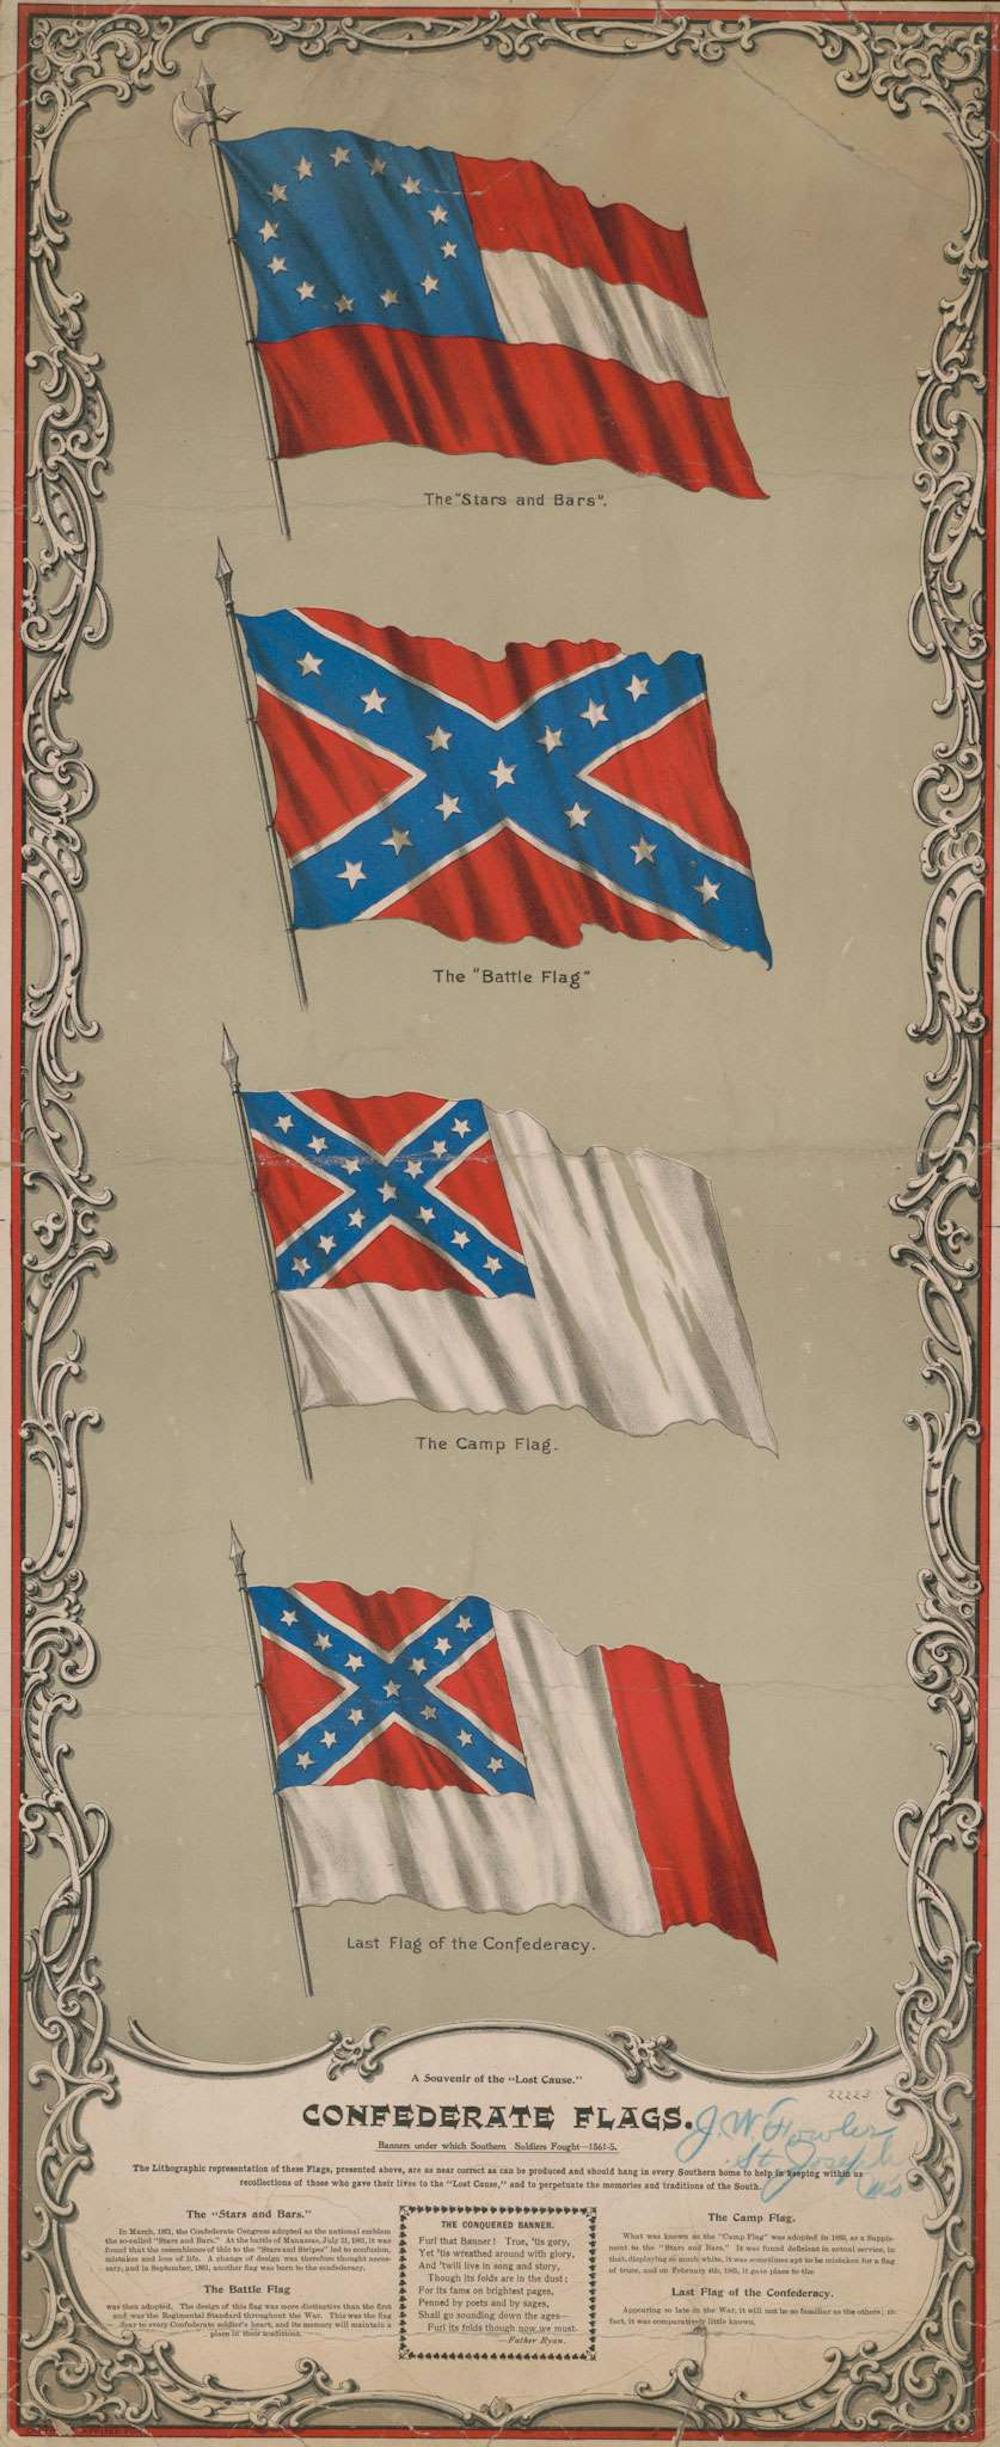 The Confederate Battle Flag Which Rioters Flew Inside The Us Capitol Has Long Been A Symbol Of White Insurrection